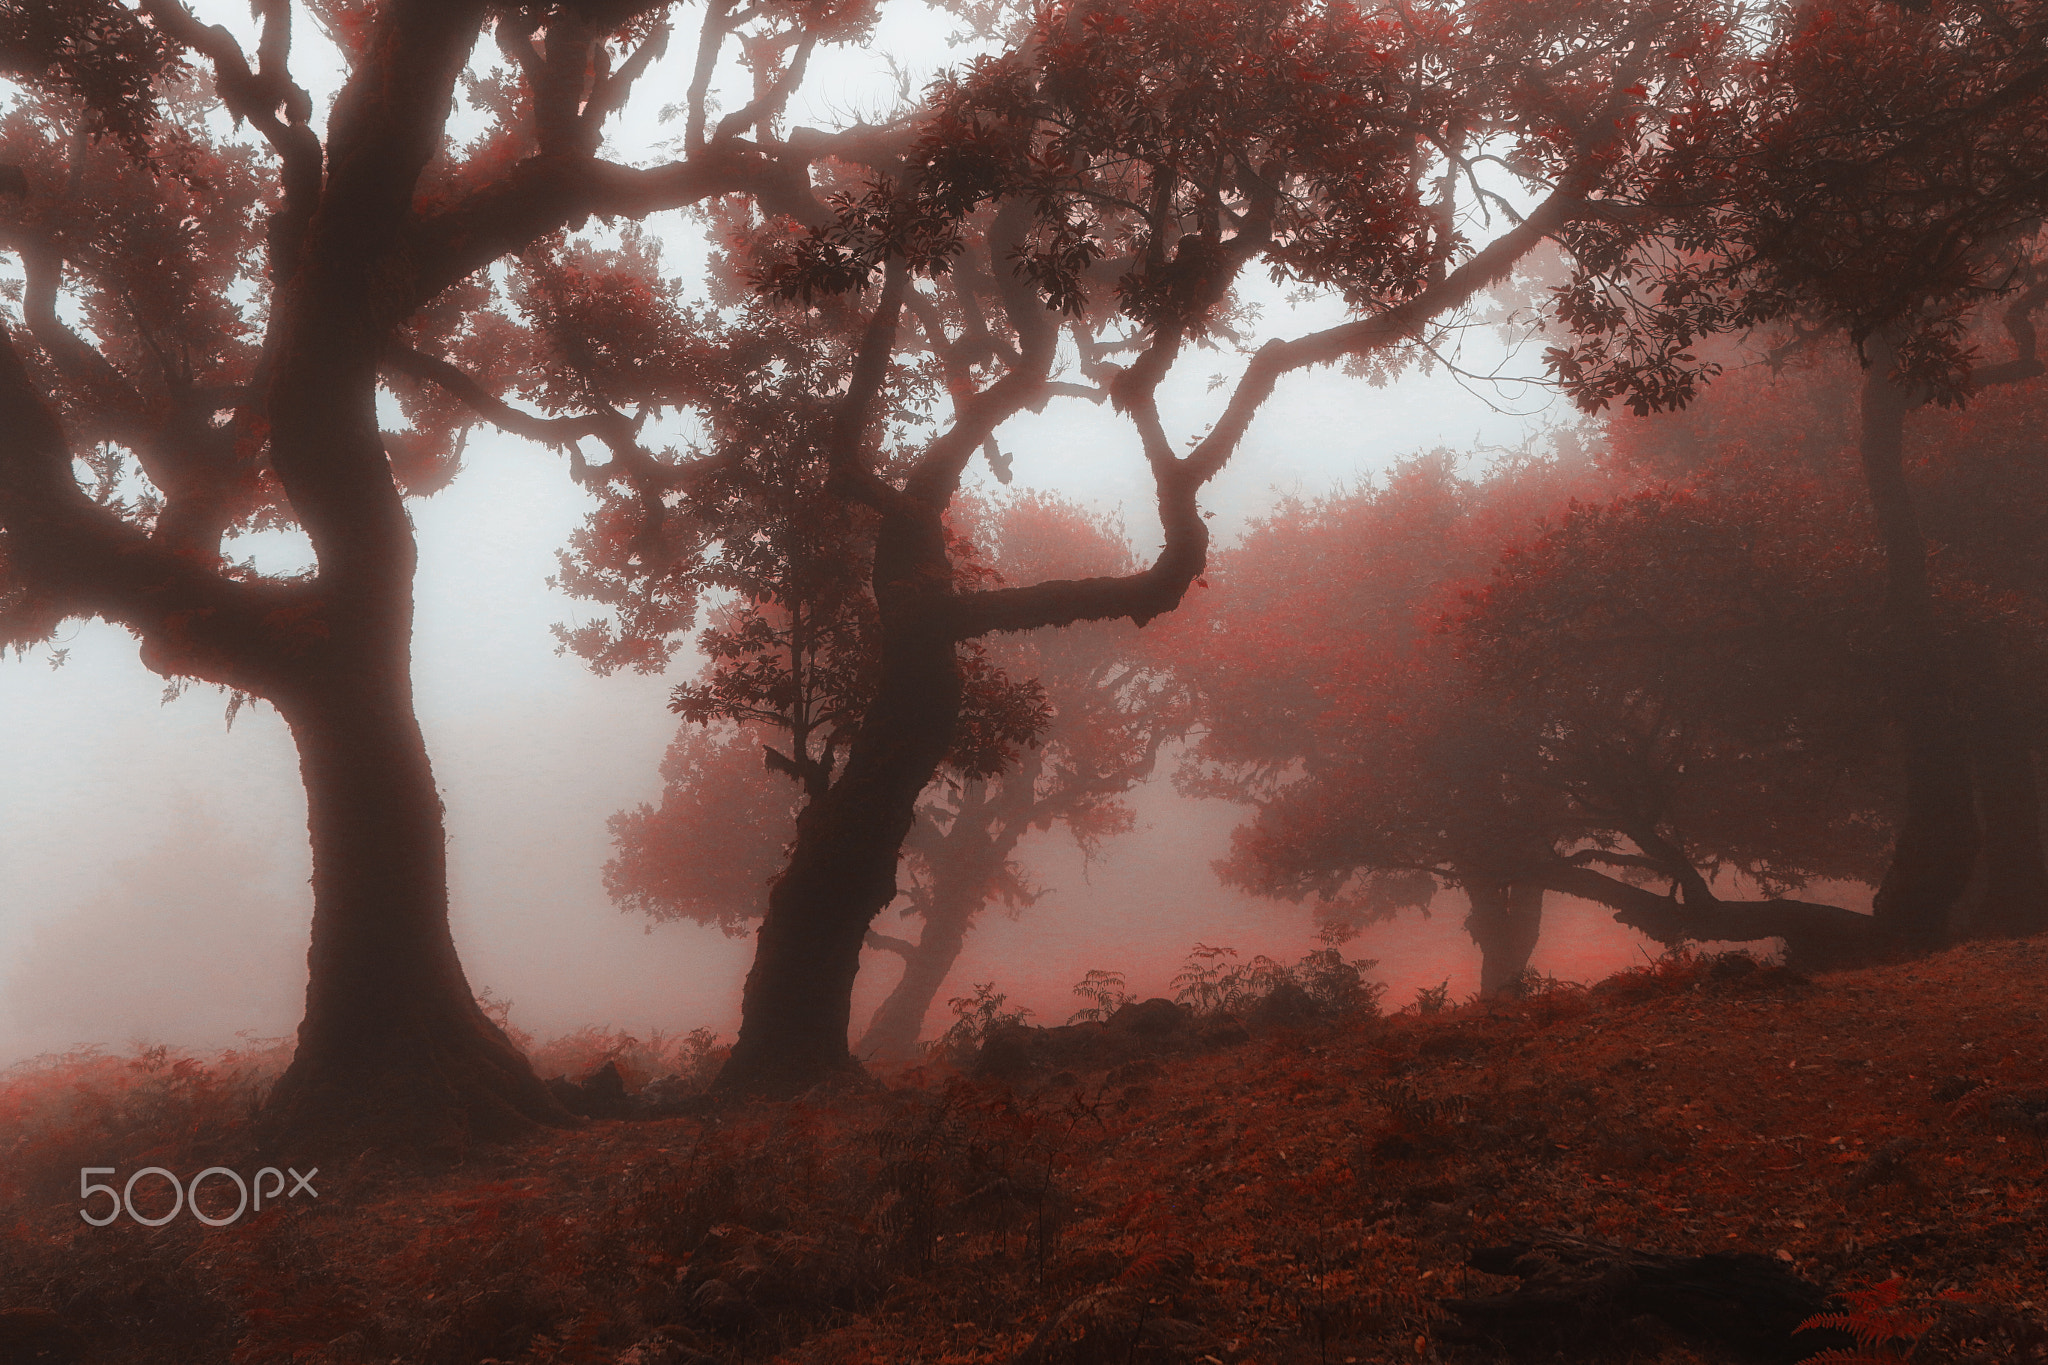 General 2048x1365 red nature landscape 500px Niko Angelopoulos trees mist watermarked